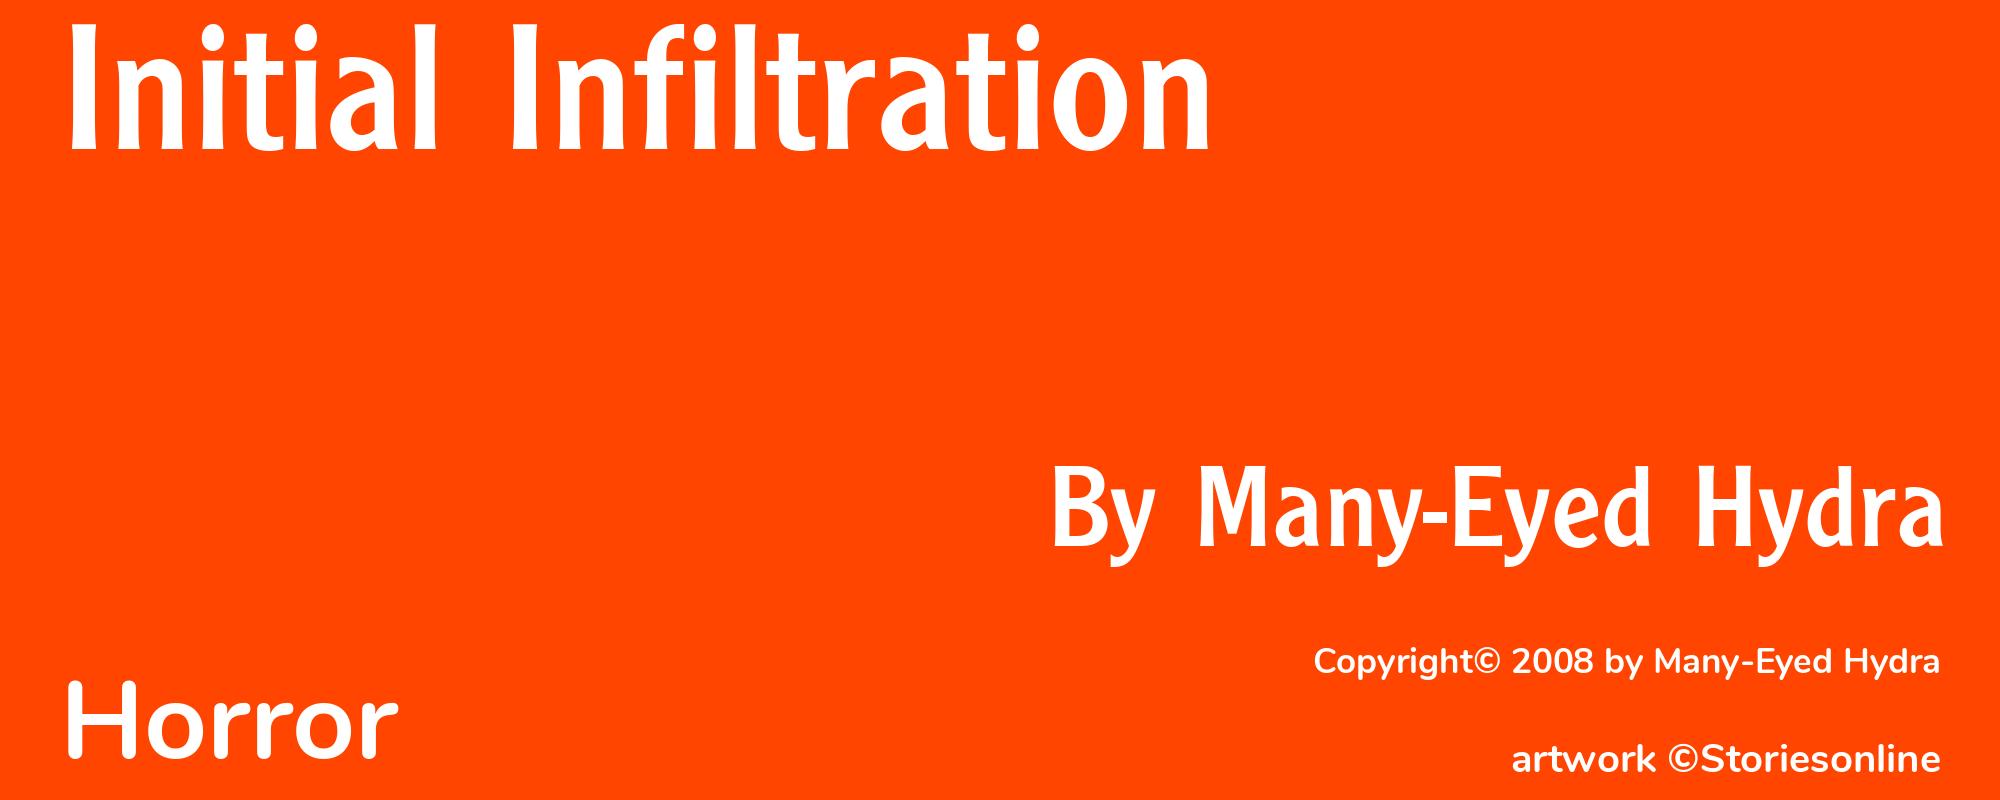 Initial Infiltration - Cover